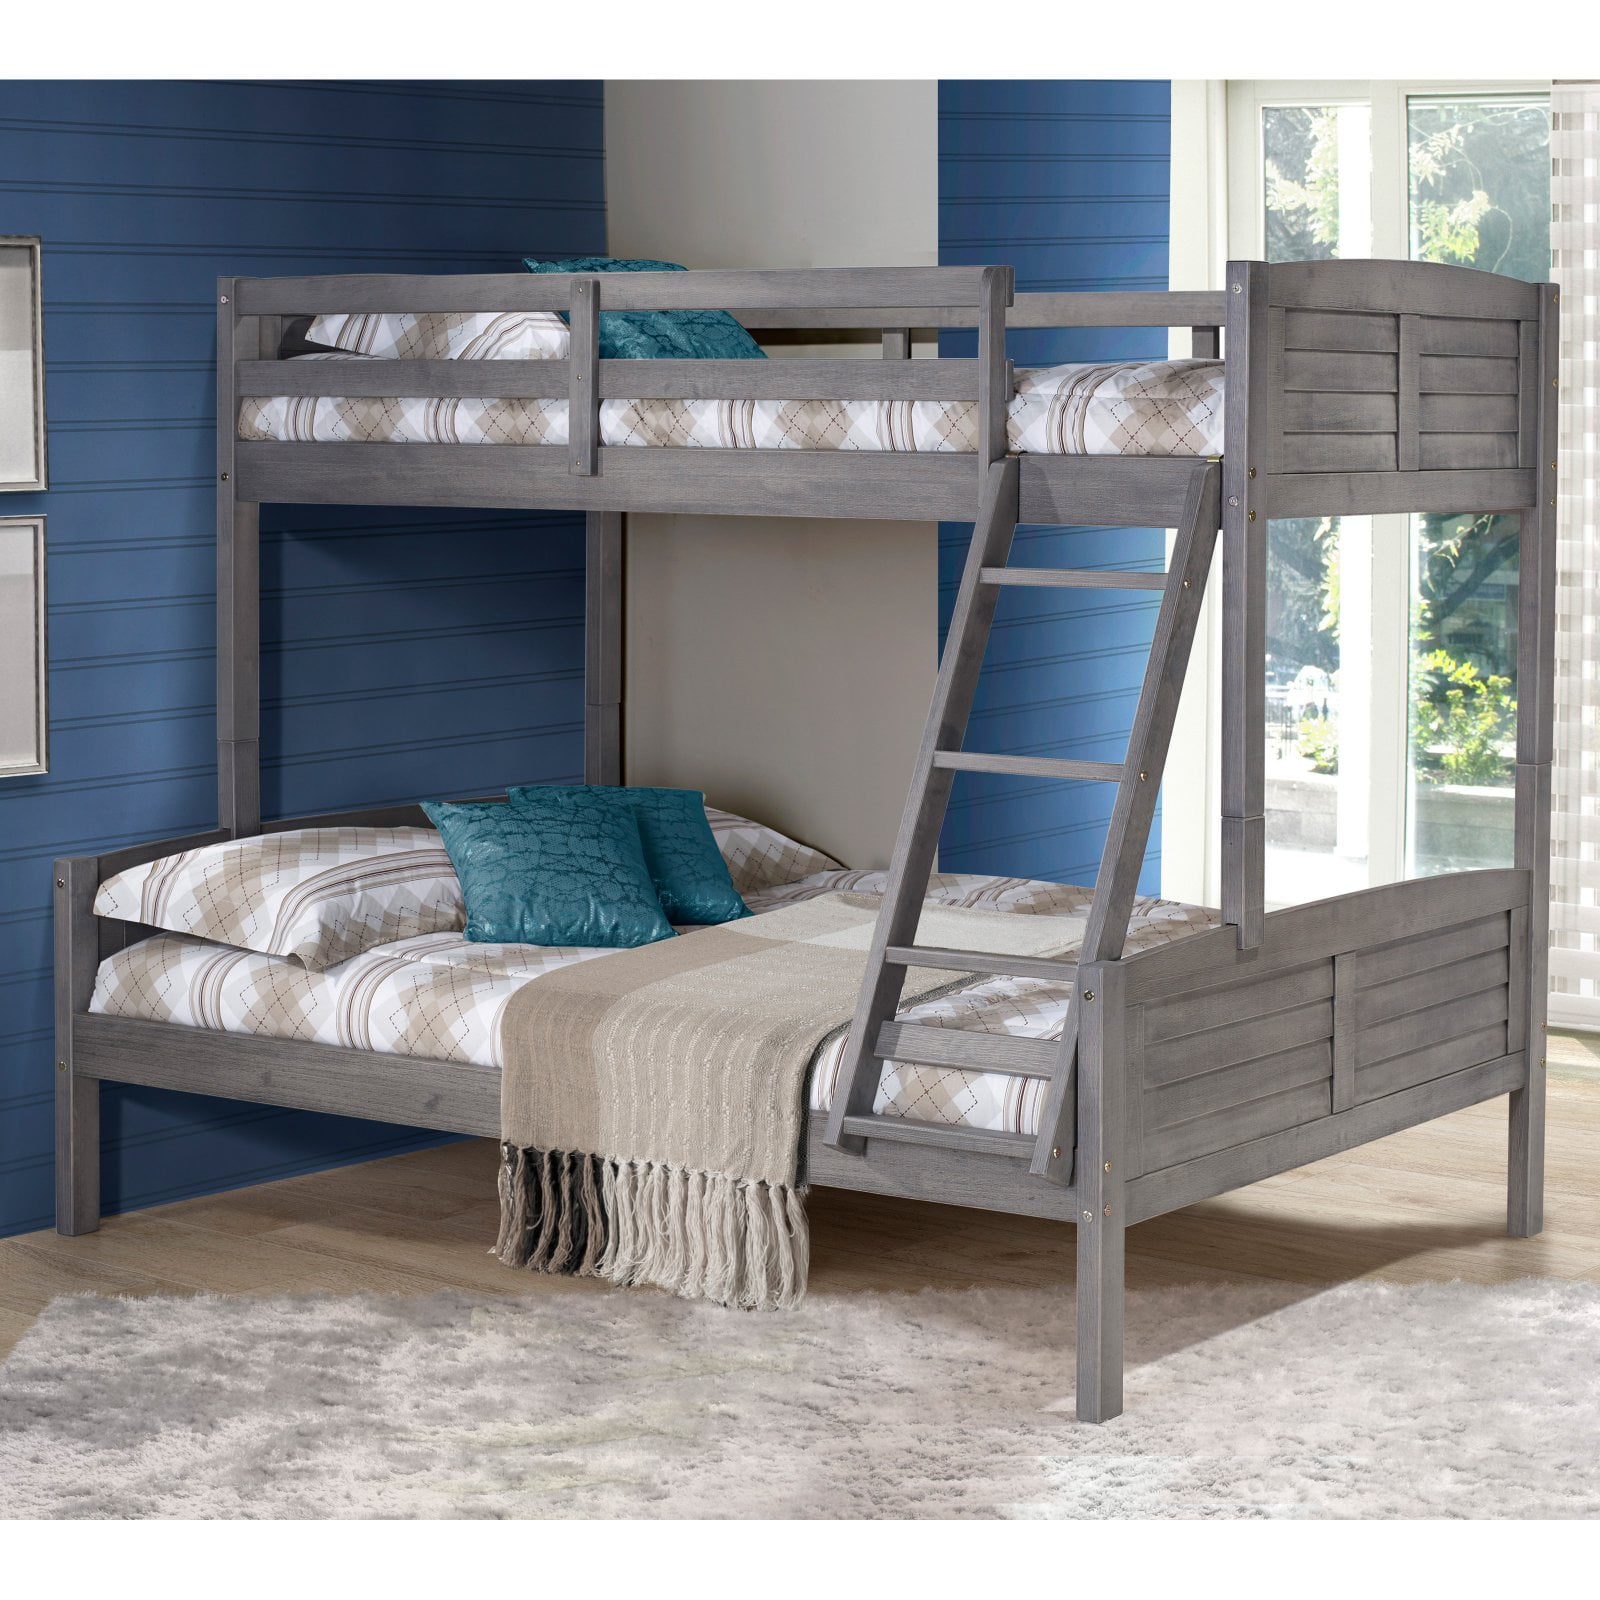 Donco Kids Louver Wood Bunk Bed Twin, Wood Bunk Beds Twin Over Full